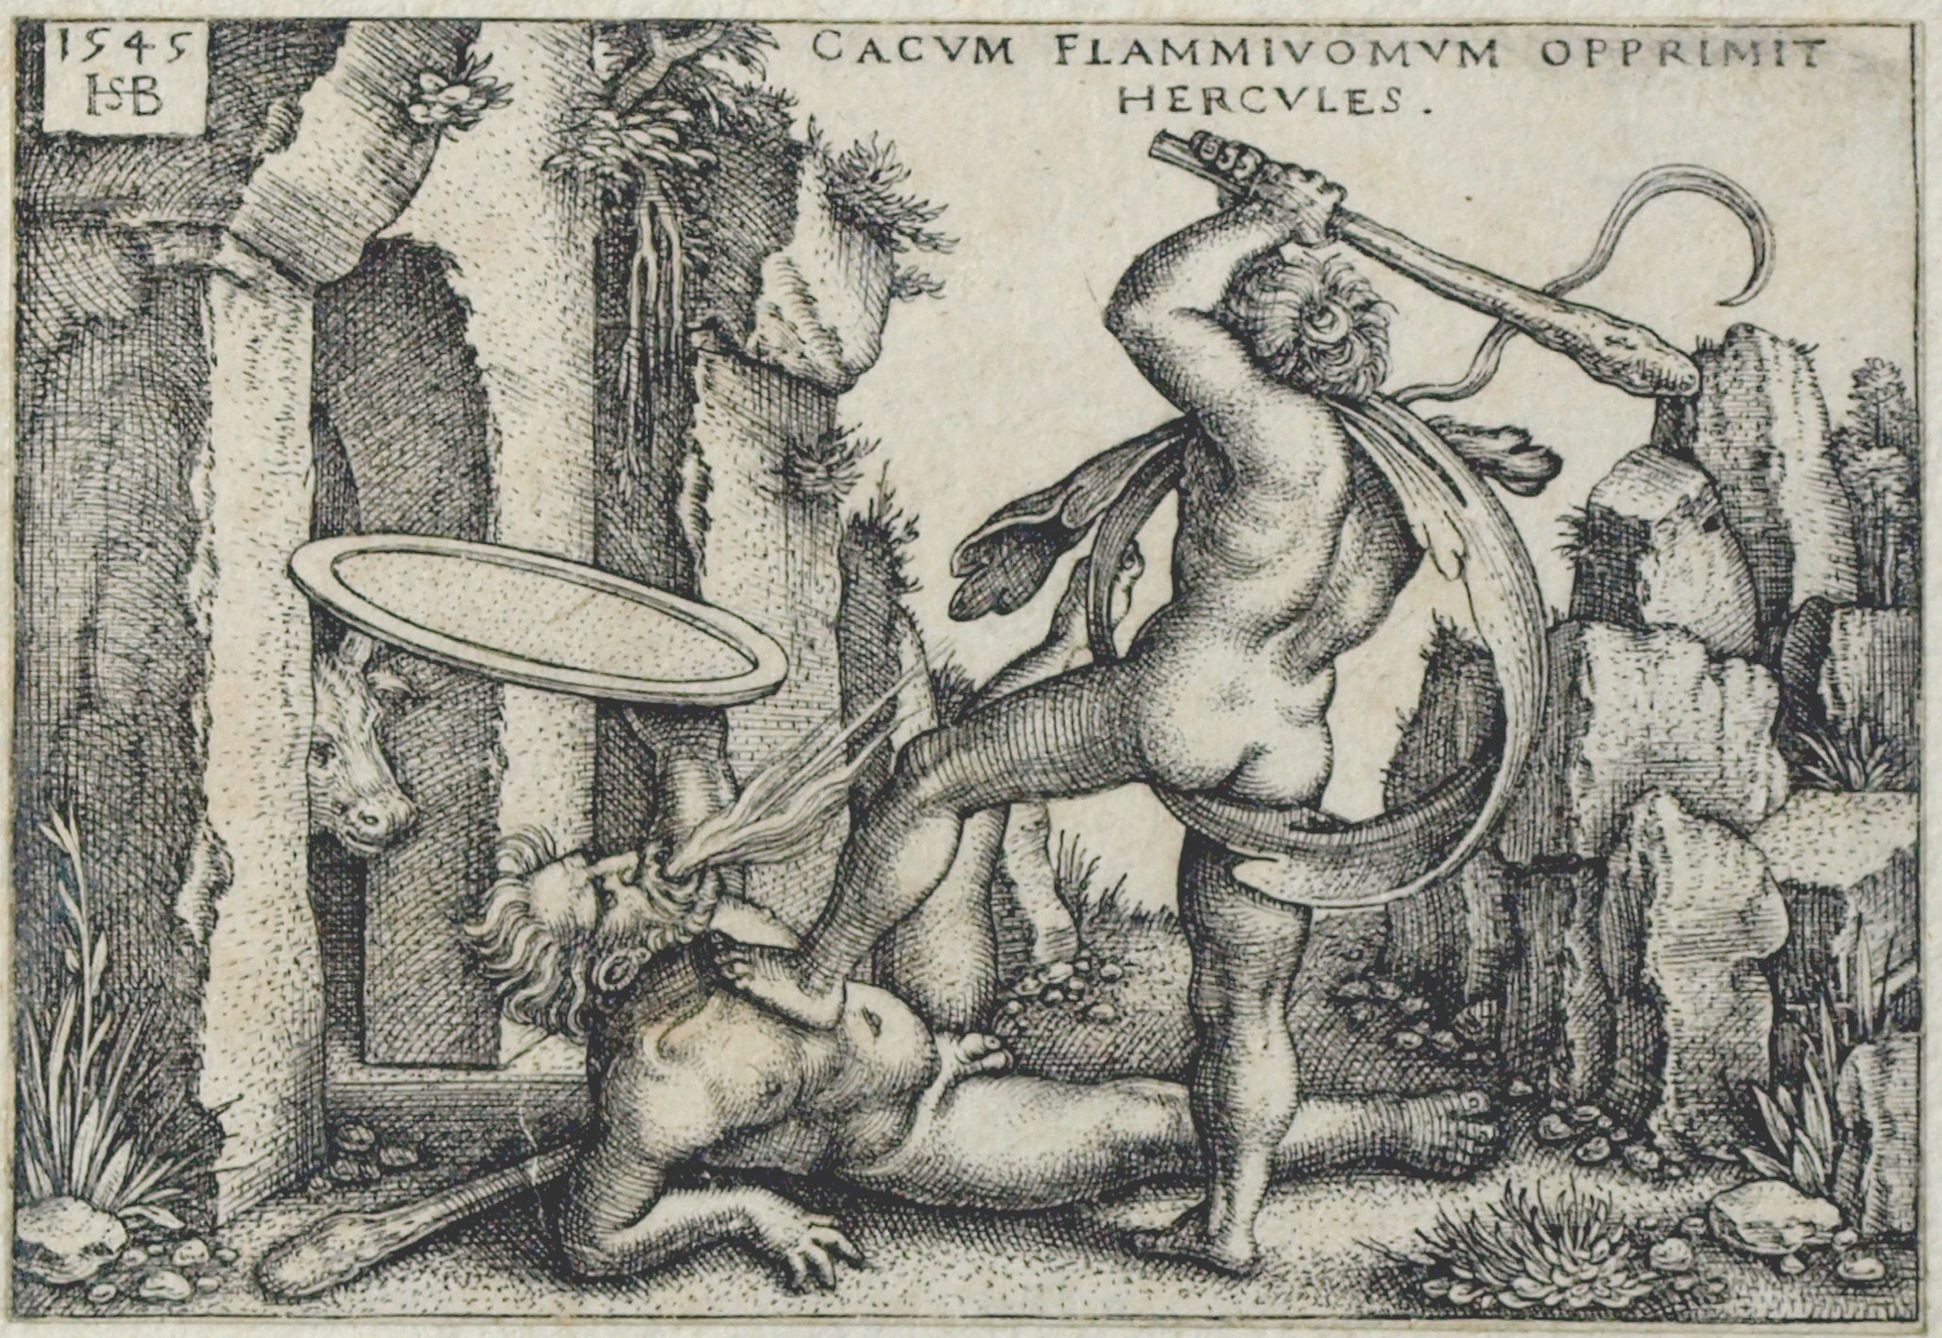 The deeds of Hercules Hercules defeats the fire-spitting Cacus, 1545, 48 x 70mm